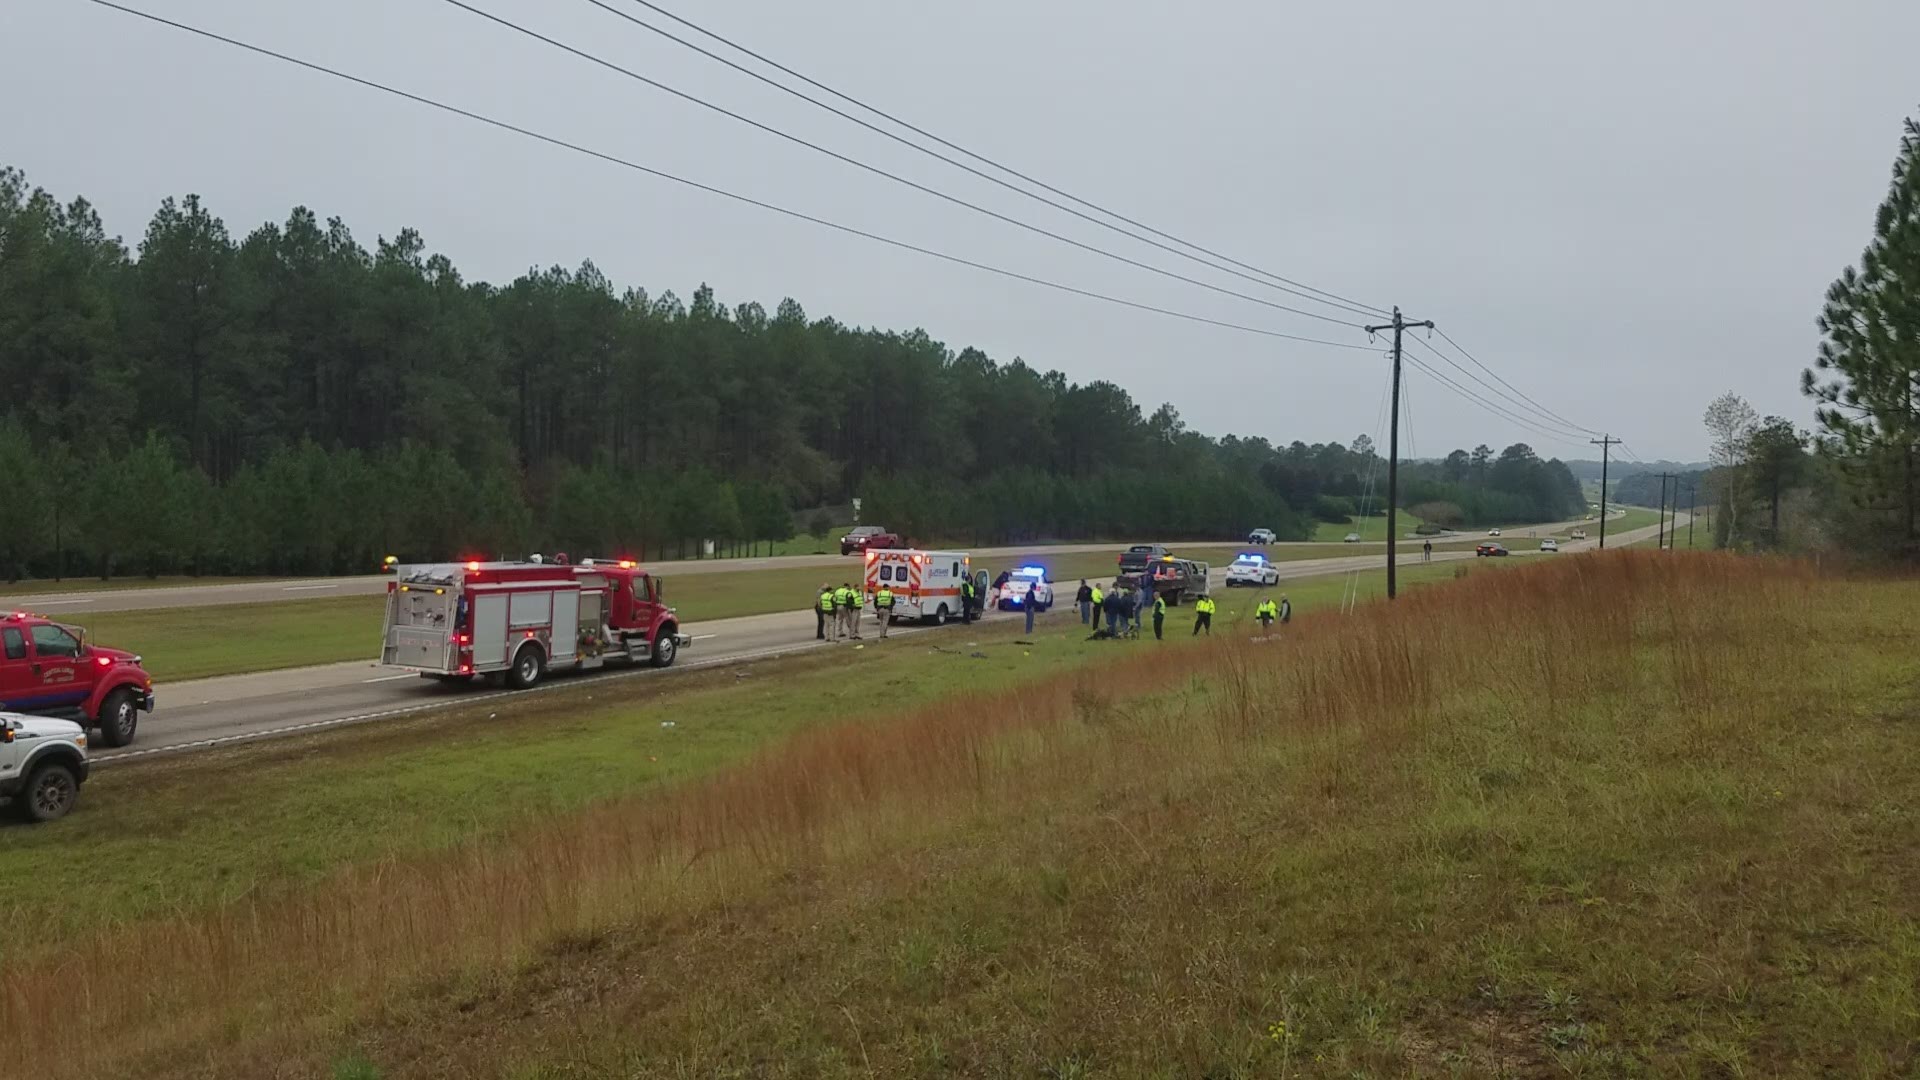 A cyclist raising money for childhood cancer research was killed Tuesday, Nov. 13, 2018, on U.S. 98 in Lamar County, Mississippi. Courtesy of Central Lamar VFD, Hattiesburg American